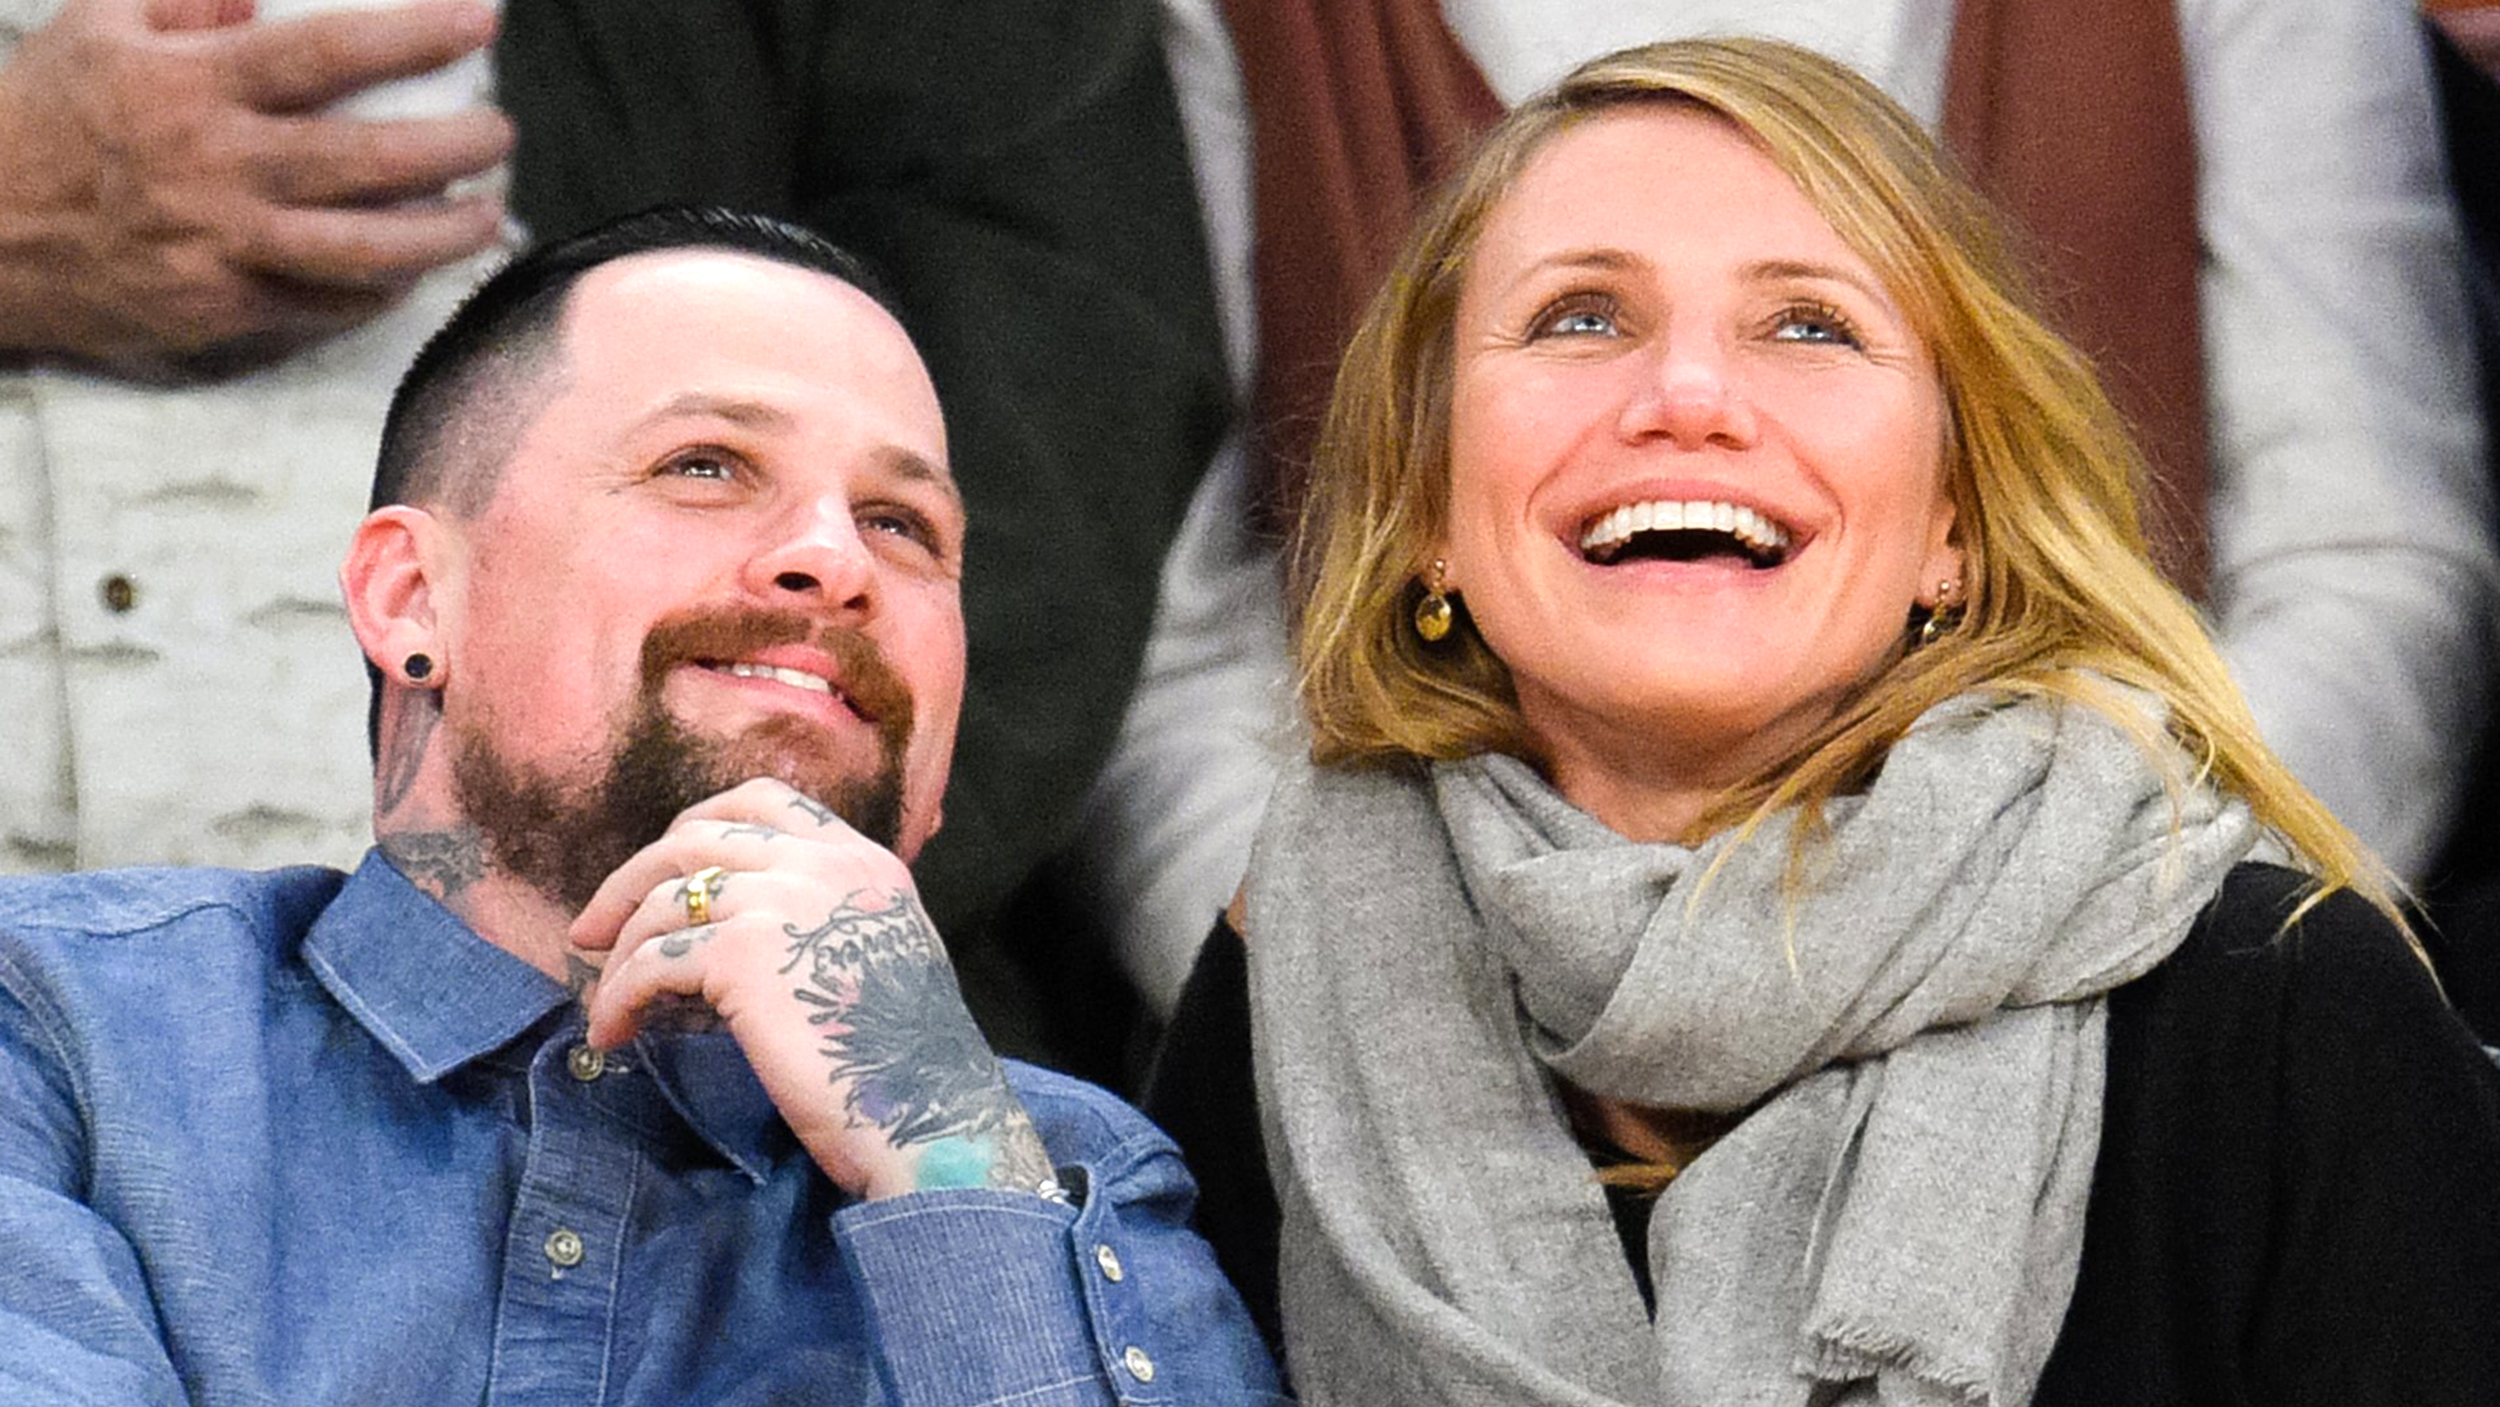 LOS ANGELES, CA - JANUARY 27:  Benji Madden (L) and Cameron Diaz attend a basketball game between the Washington Wizards and the Los Angeles Lakers at Staples Center on January 27, 2015 in Los Angeles, California.  (Photo by Noel Vasquez/GC Images)